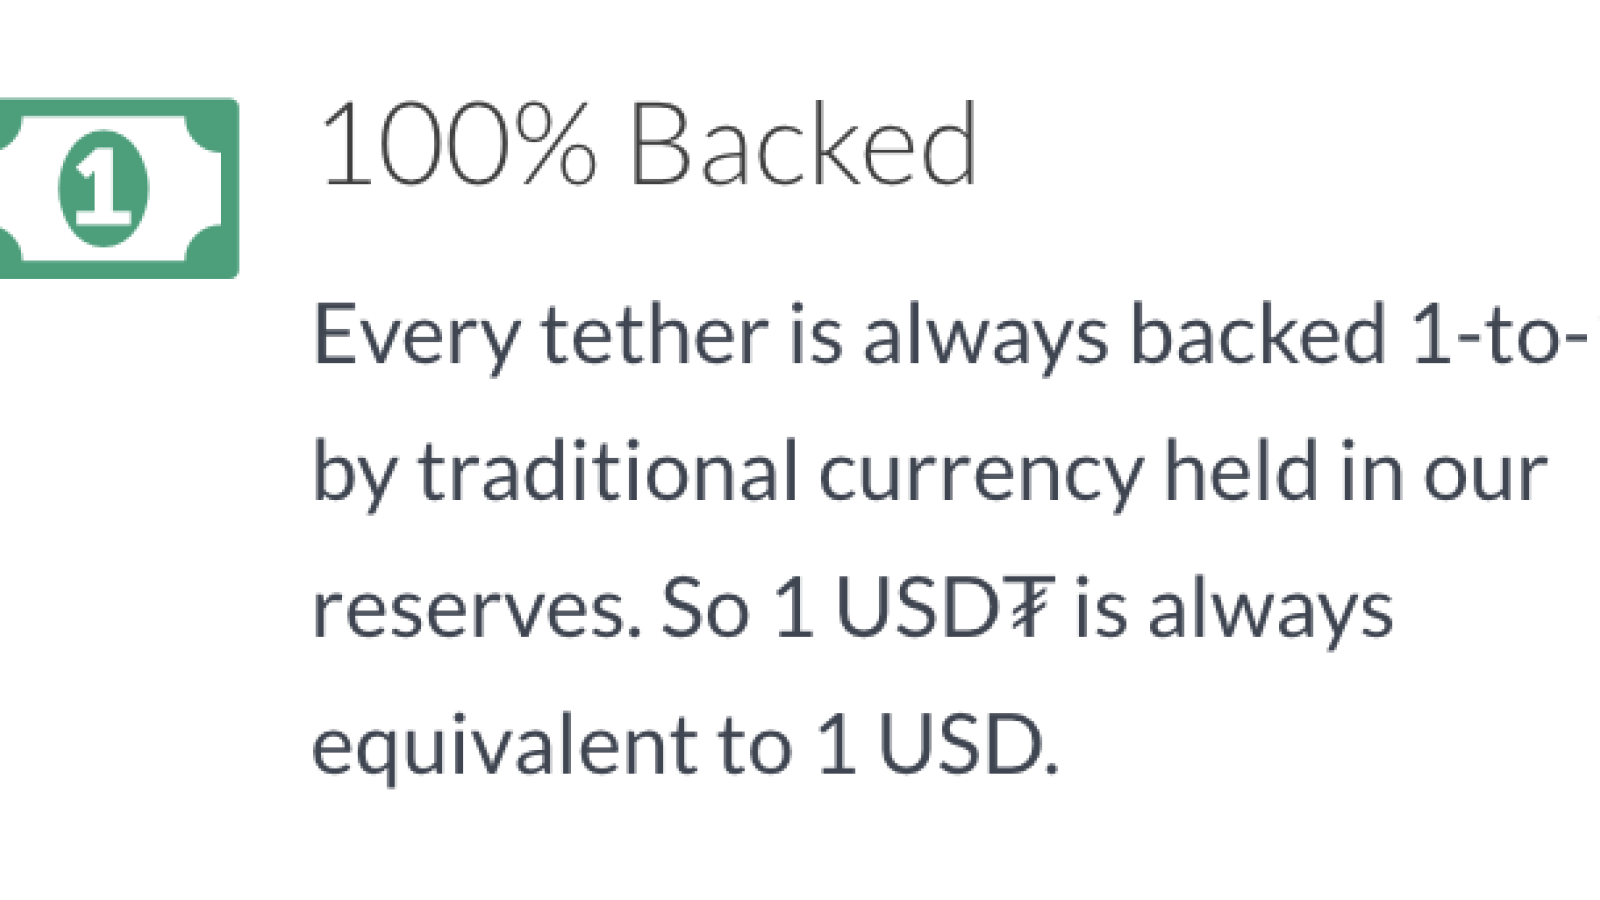 Every USDT coin is supposed to be backed up by a fiat $1